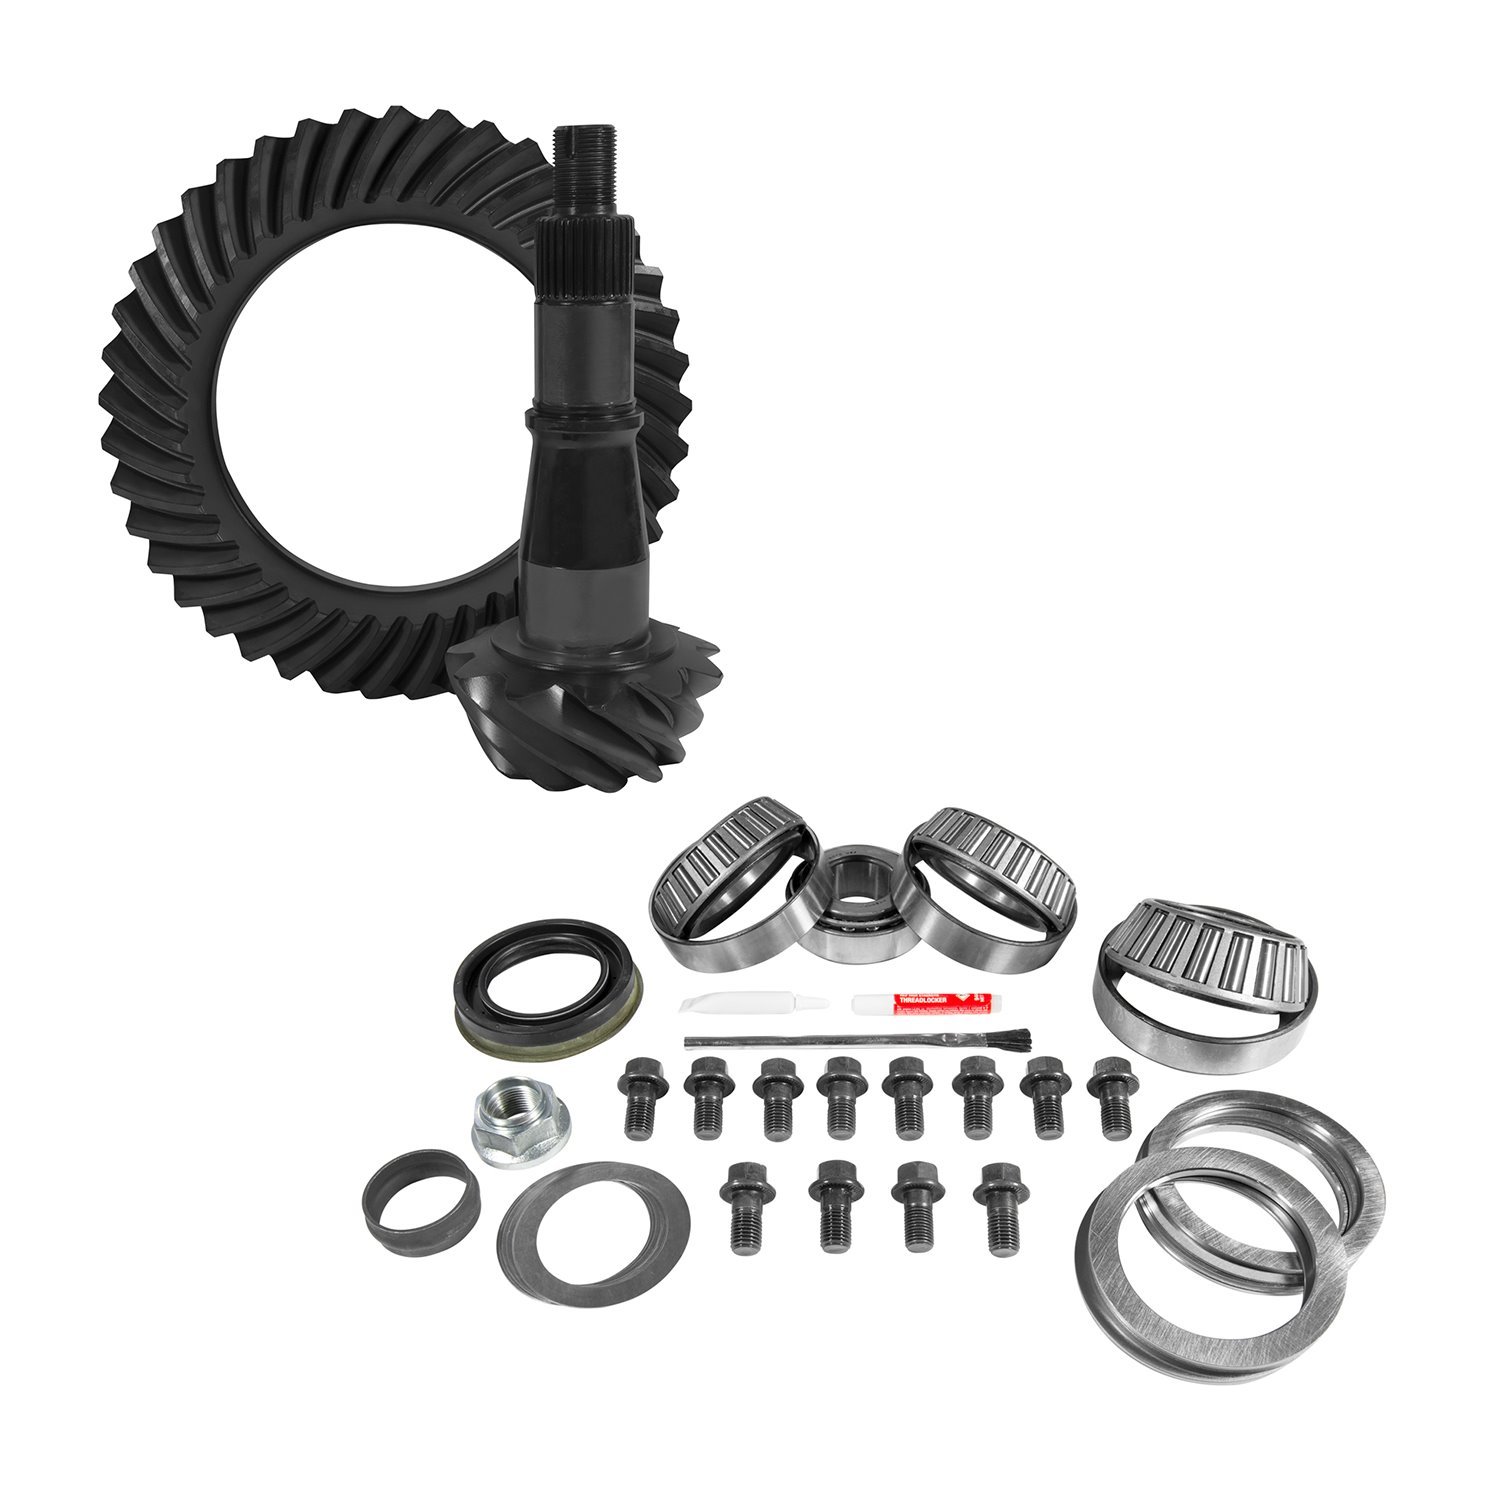 USA Standard 10703 9.5 in. GM 3.42 Rear Ring & Pinion Install Kit, Axle Bearings & Seals